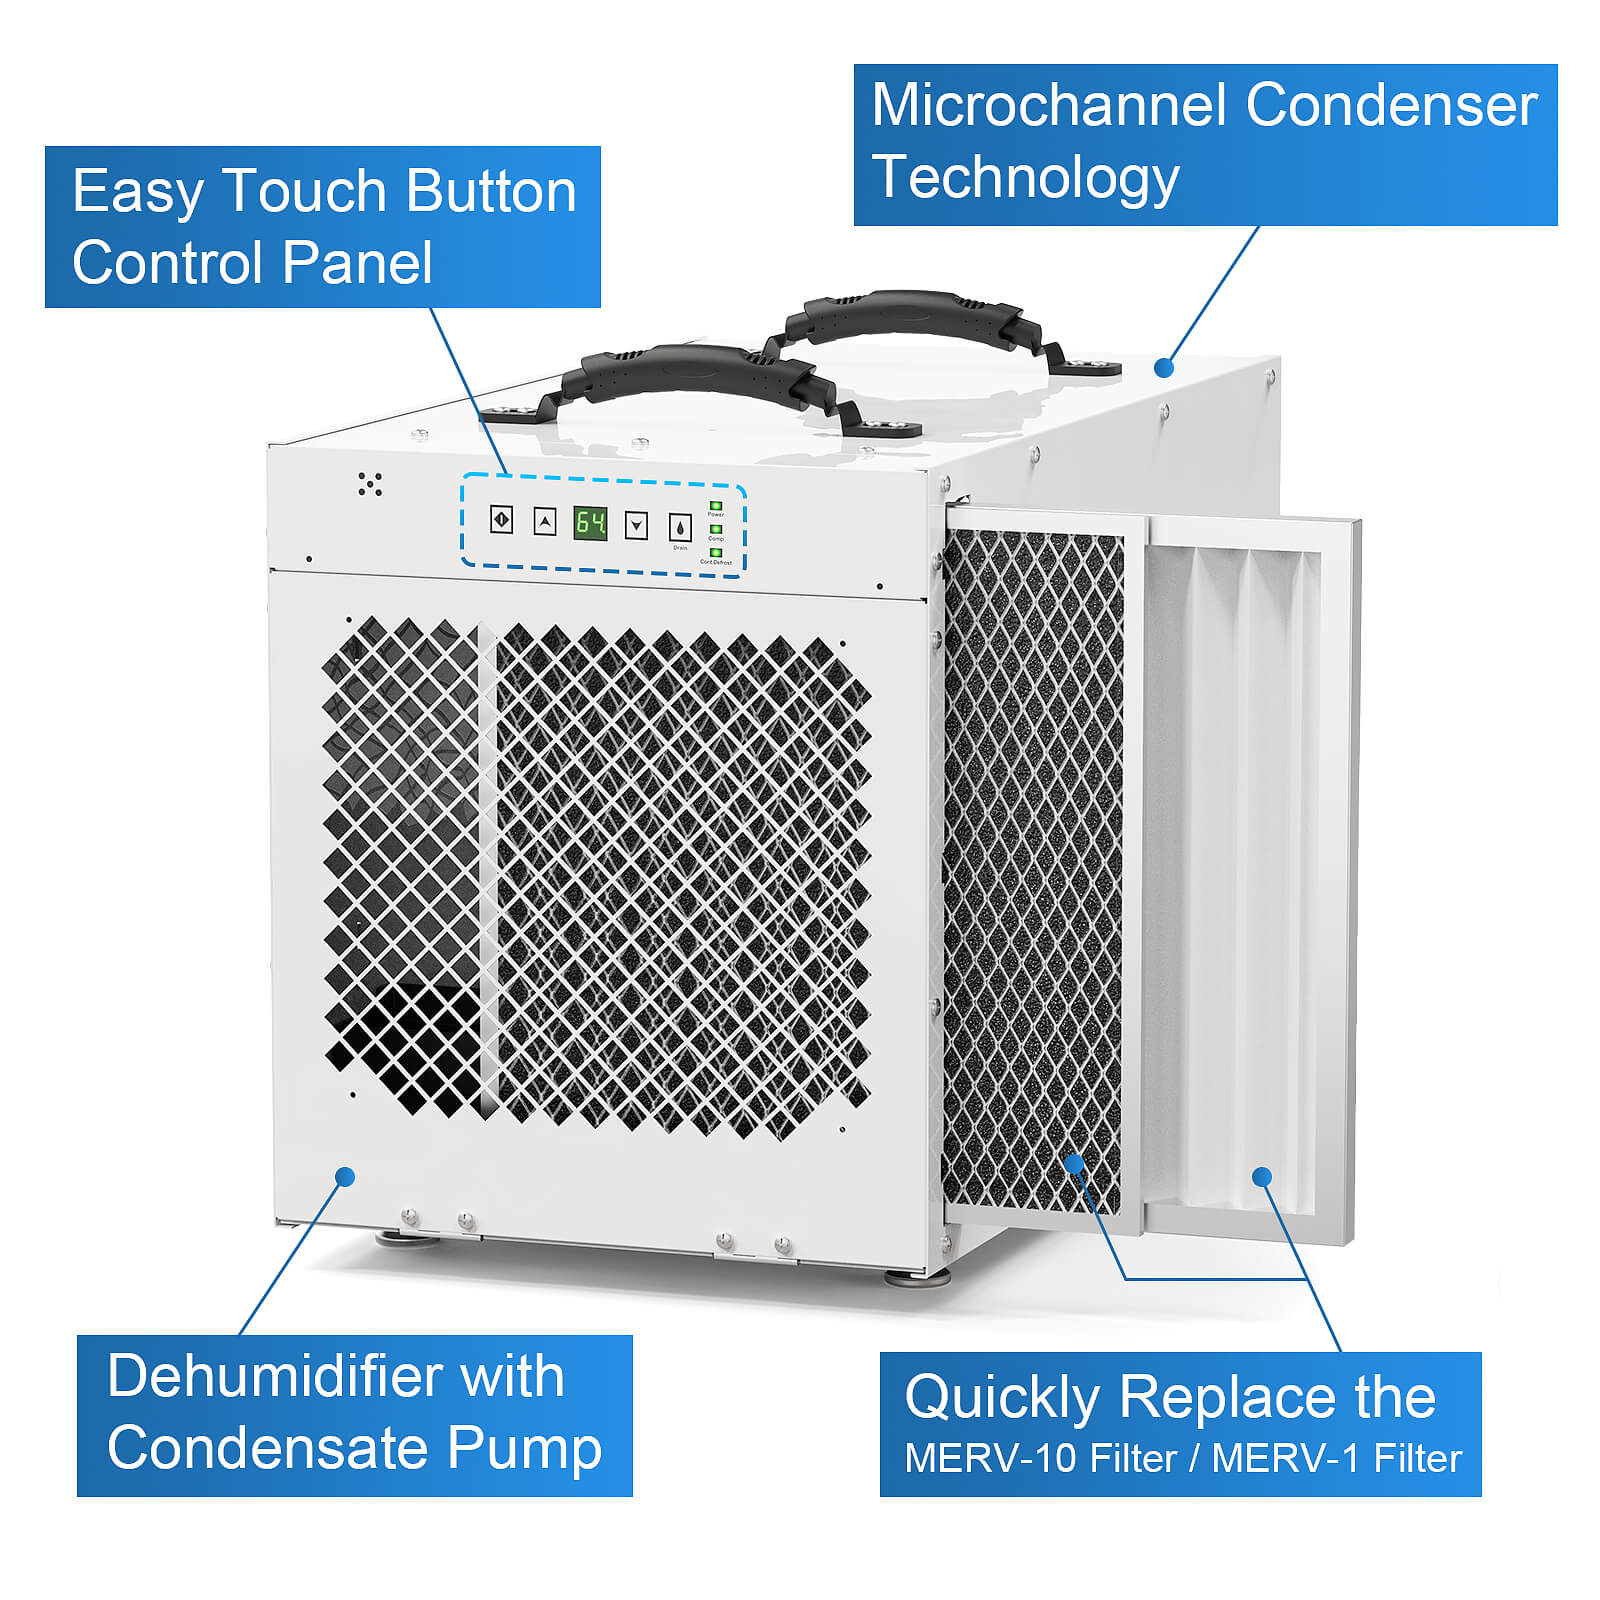 AlorAir Sentinel HDi100 Commercial Dehumidifier with Pump, 220 Pints Whole Homes Dehumidifier for Crawl Spaces, Basements, up to 2,900 sq. ft. 5 Years Warranty, cETL, Optional Remote Monitoring AlorAir